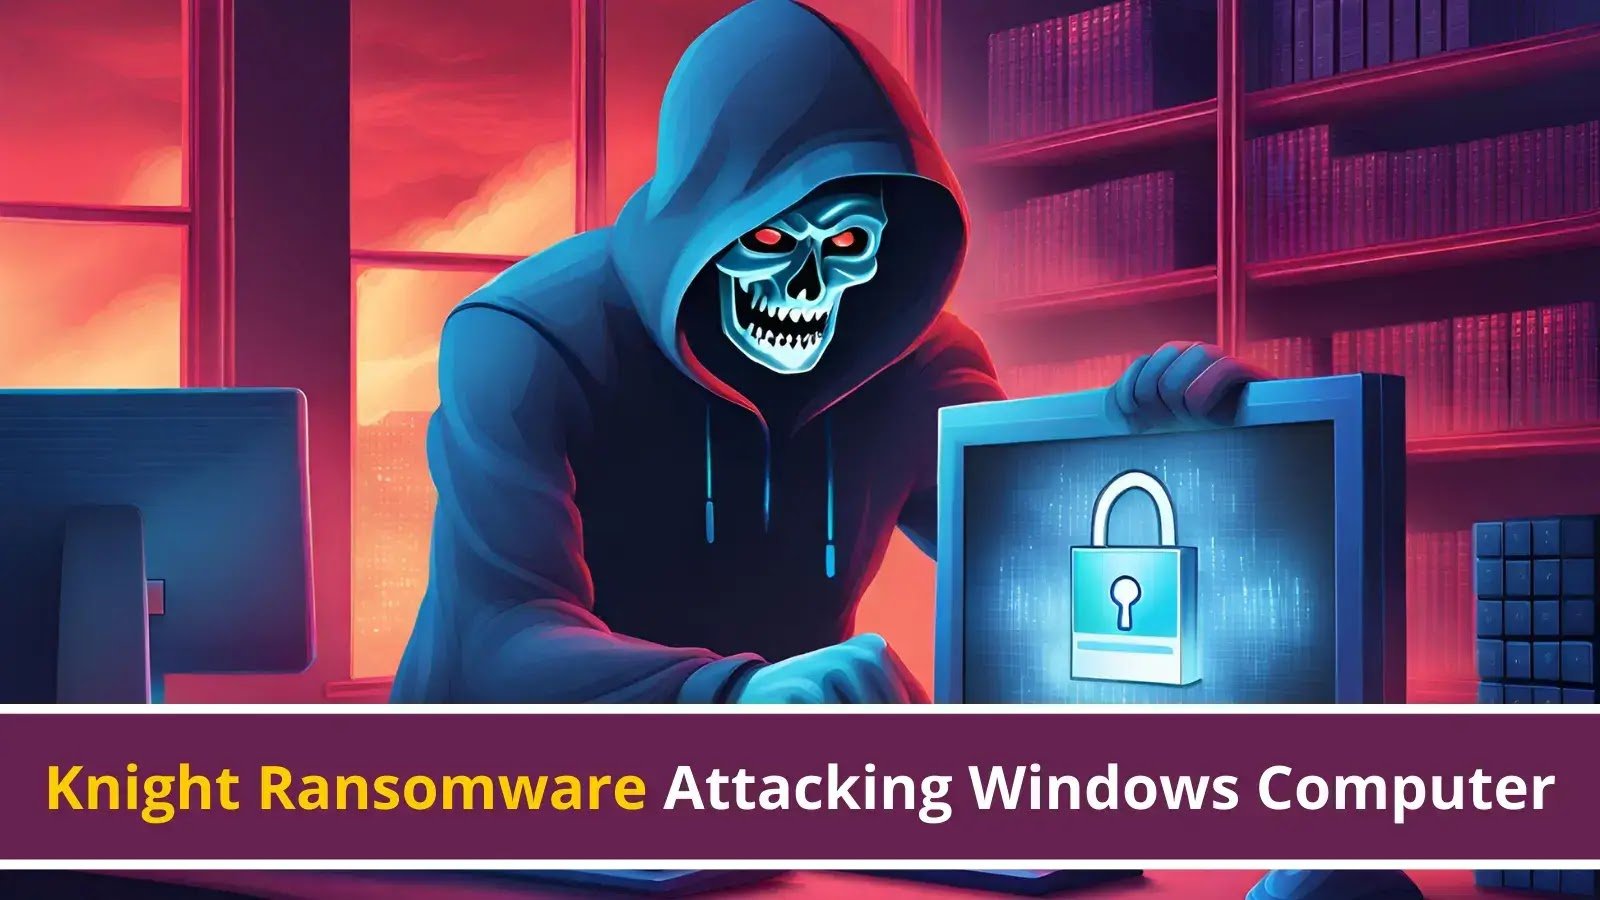 Knight Ransomware Attacking Windows Computer to Exfiltrate Sensitive Data